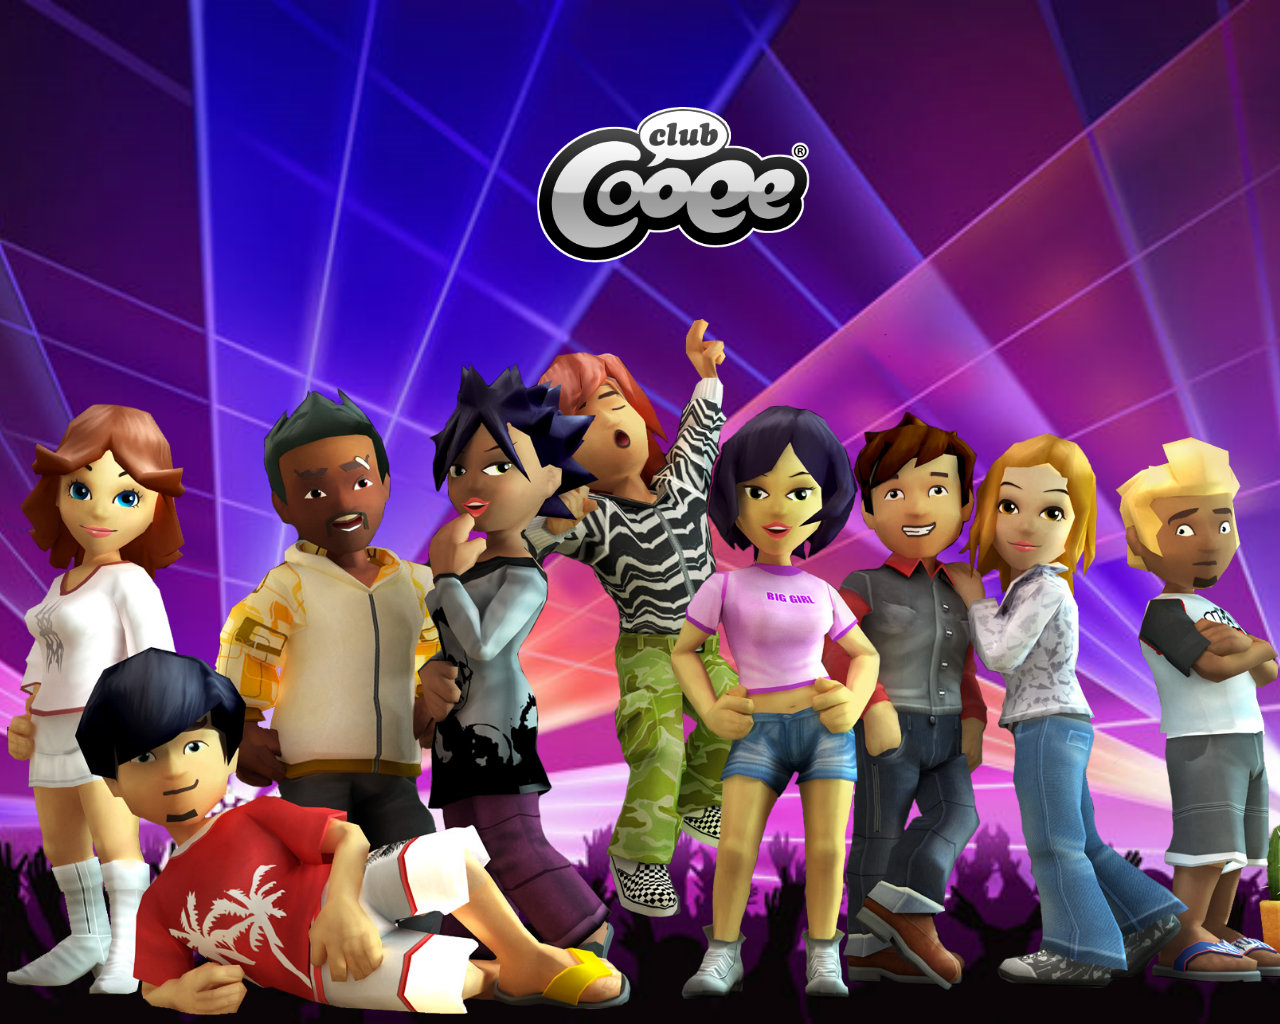 Club Cooee Wallpapers.